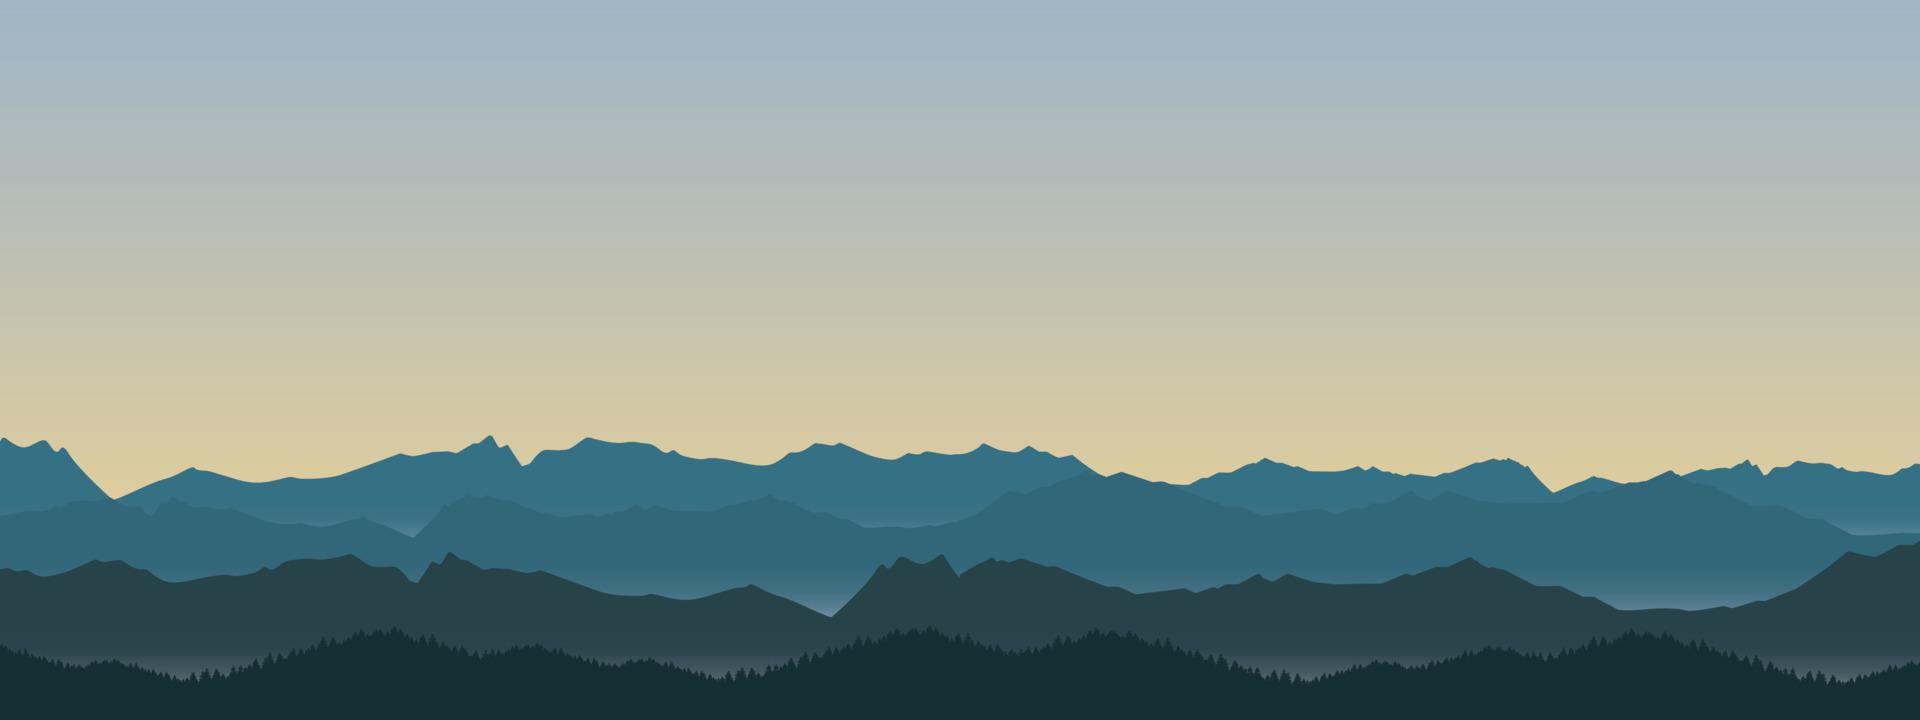 foggy mountain and forest landscape illustration in the morning and evening vector